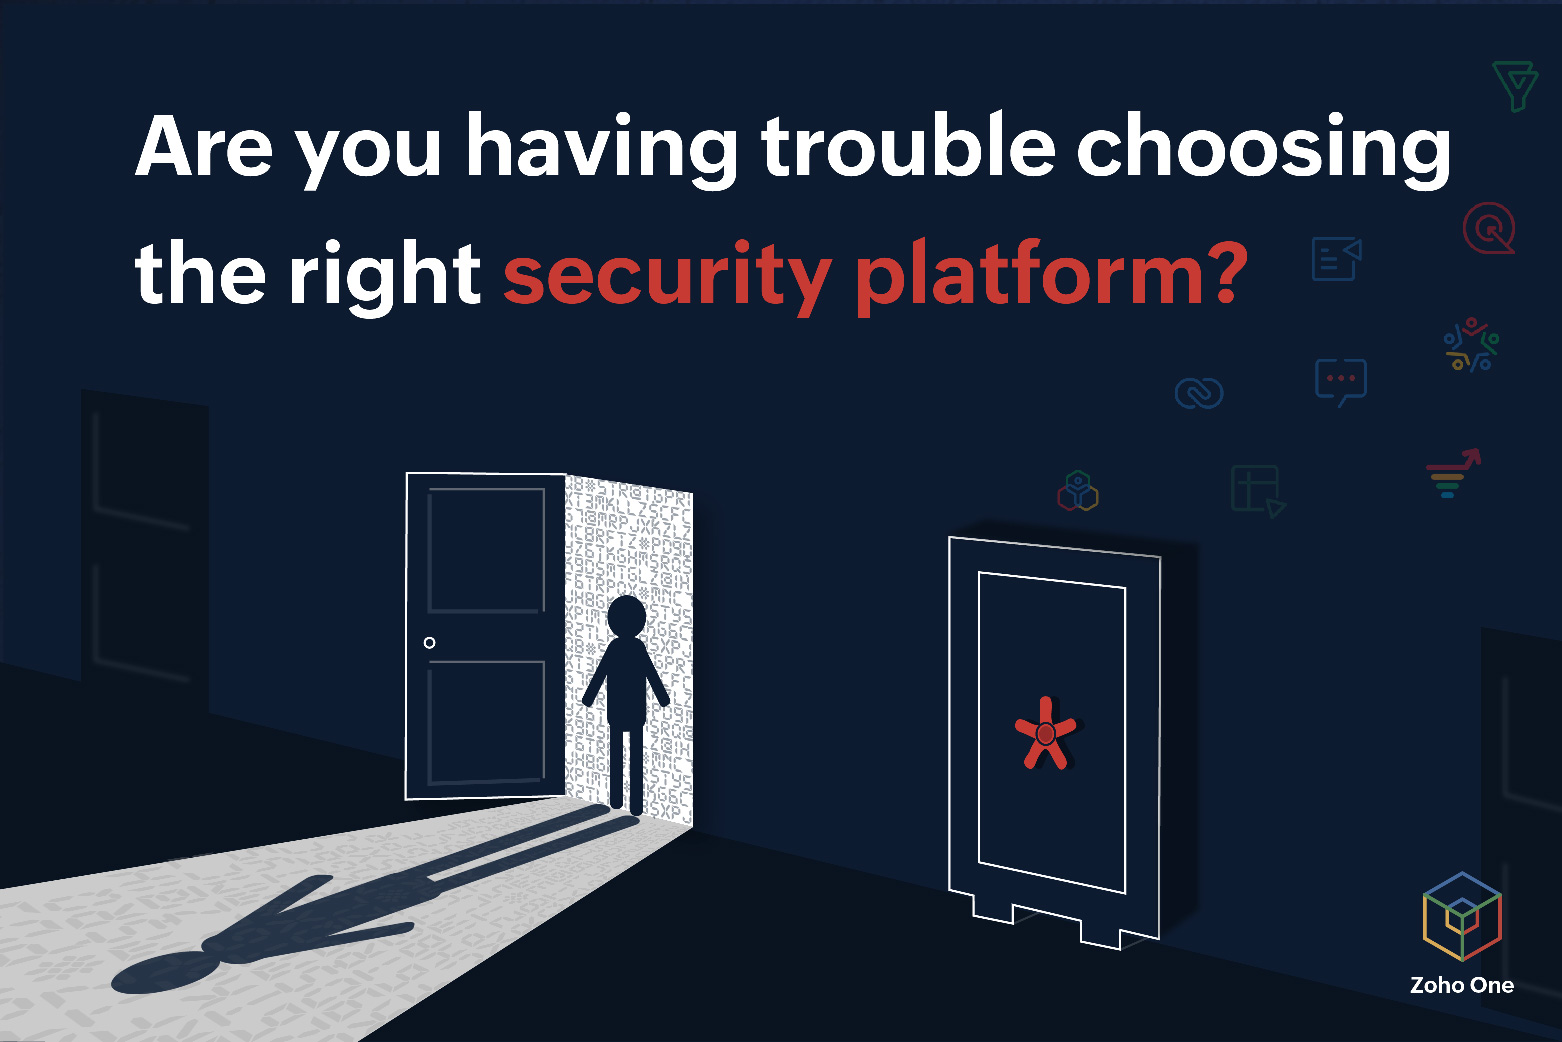 Are you having trouble choosing the right security platform? Read up on what Zoho One recommends! 